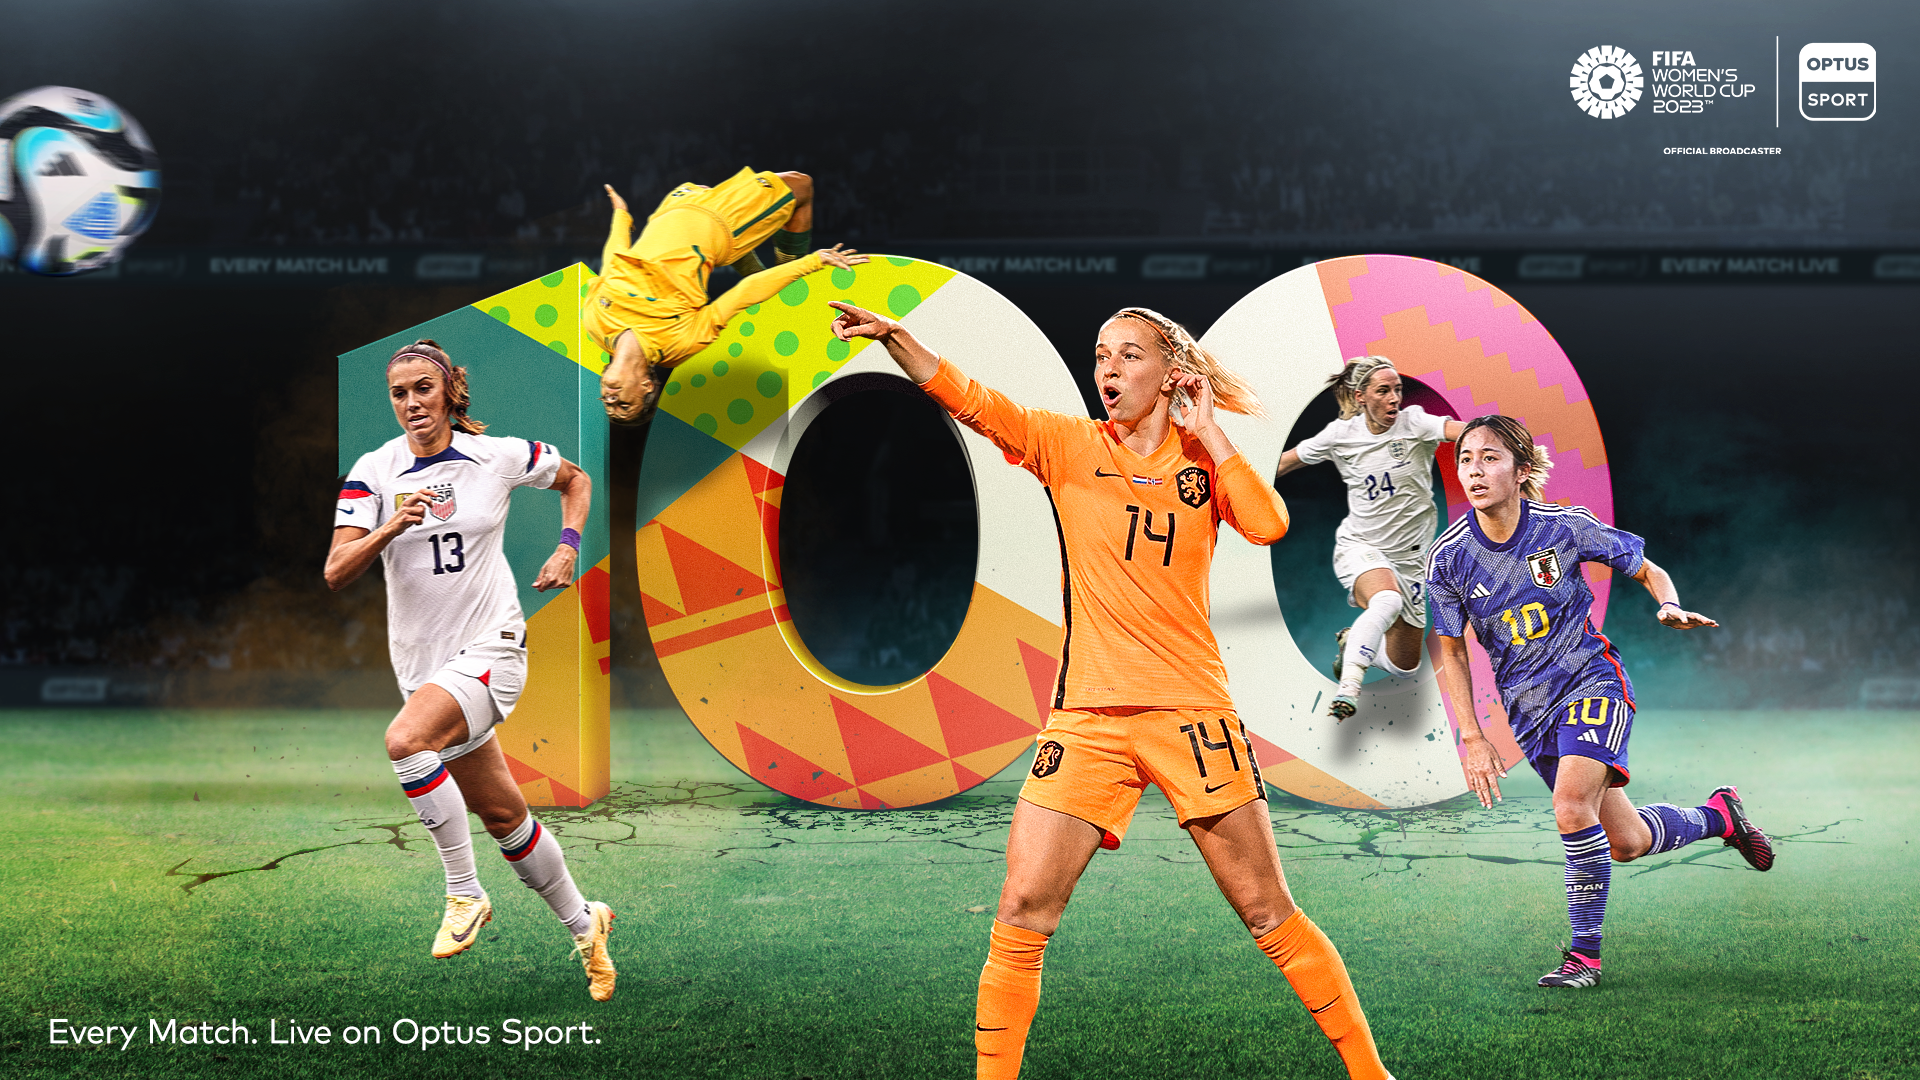 100 days until the FIFA Womens World Cup 2023 kicks off in Australia and New Zealand